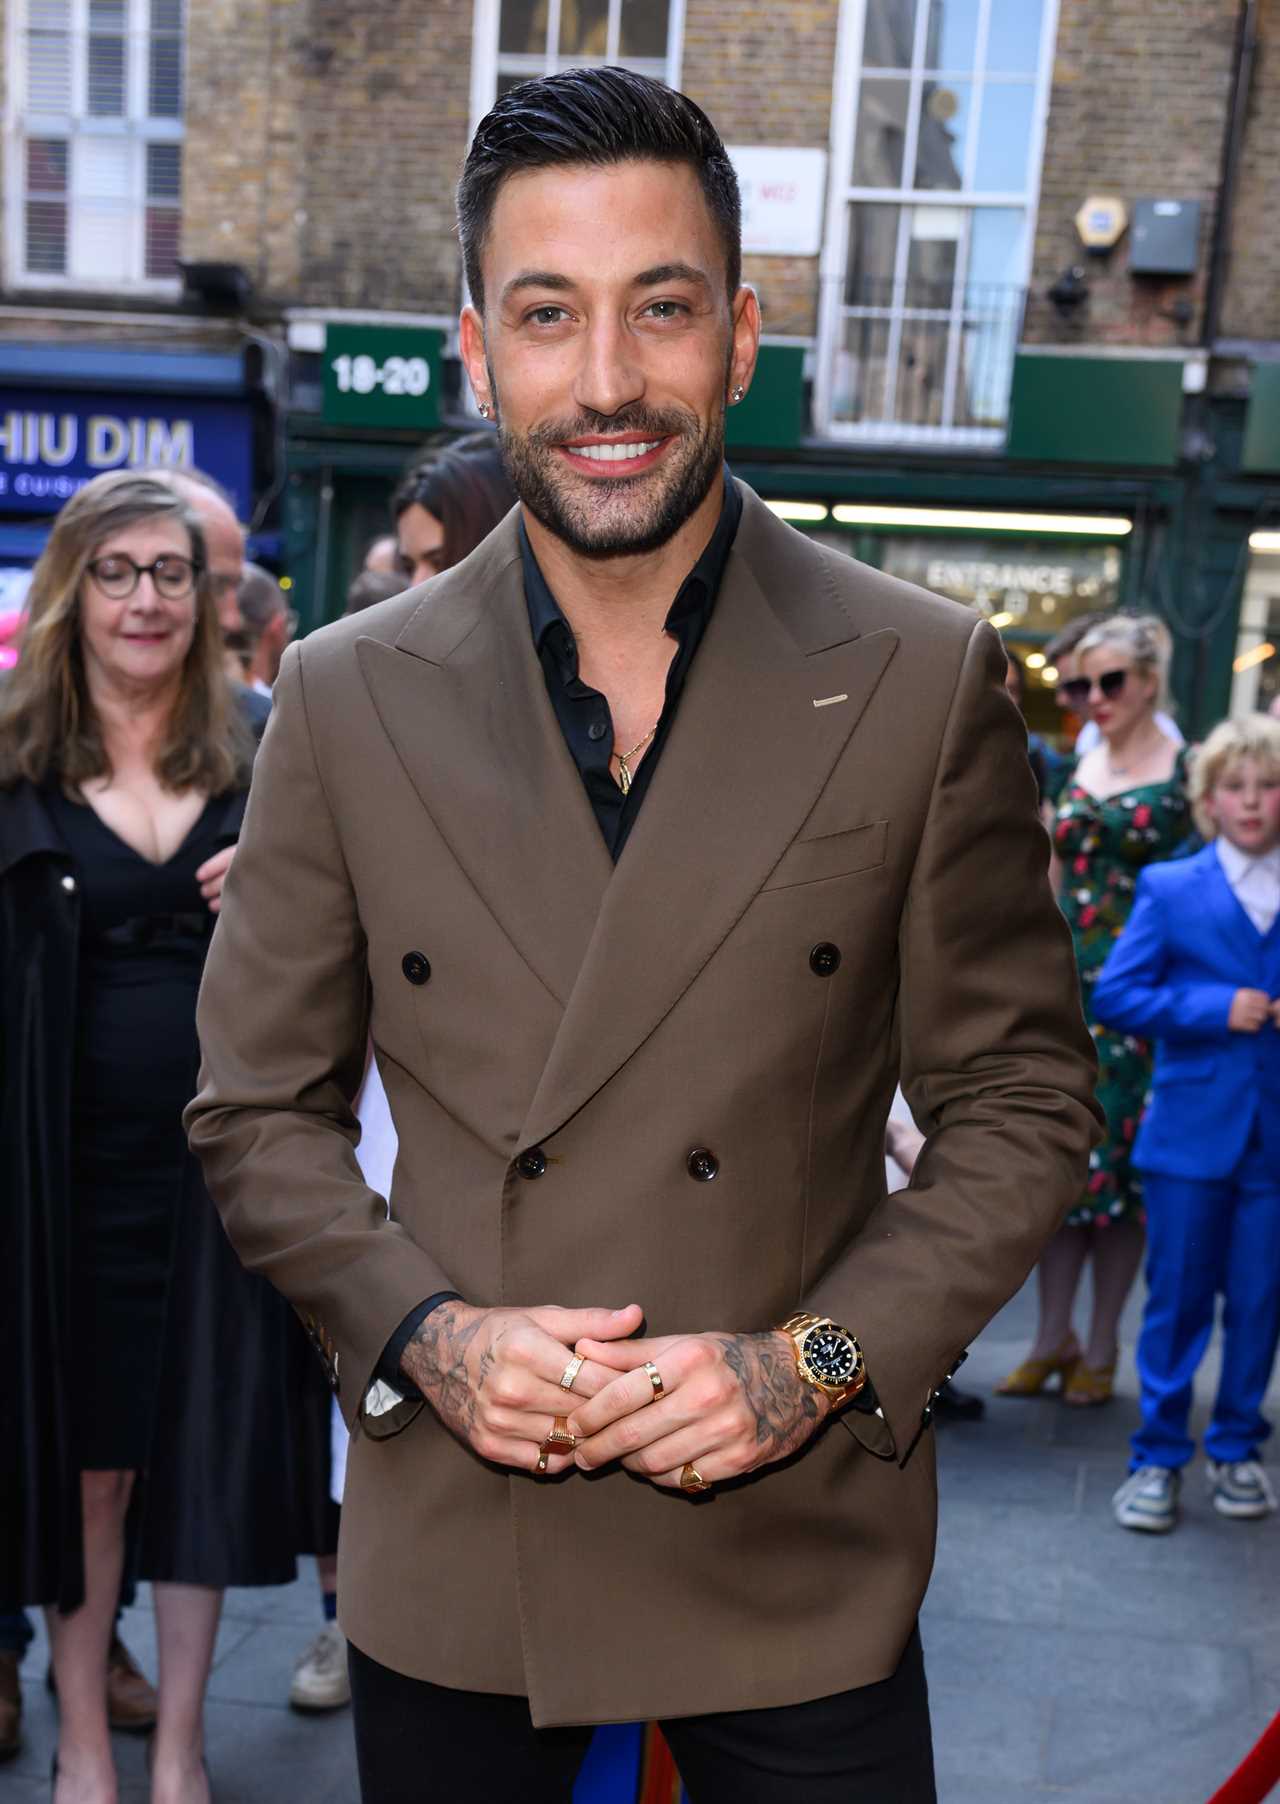 Giovanni Pernice shares loved-up photo with girlfriend amid Strictly misconduct storm